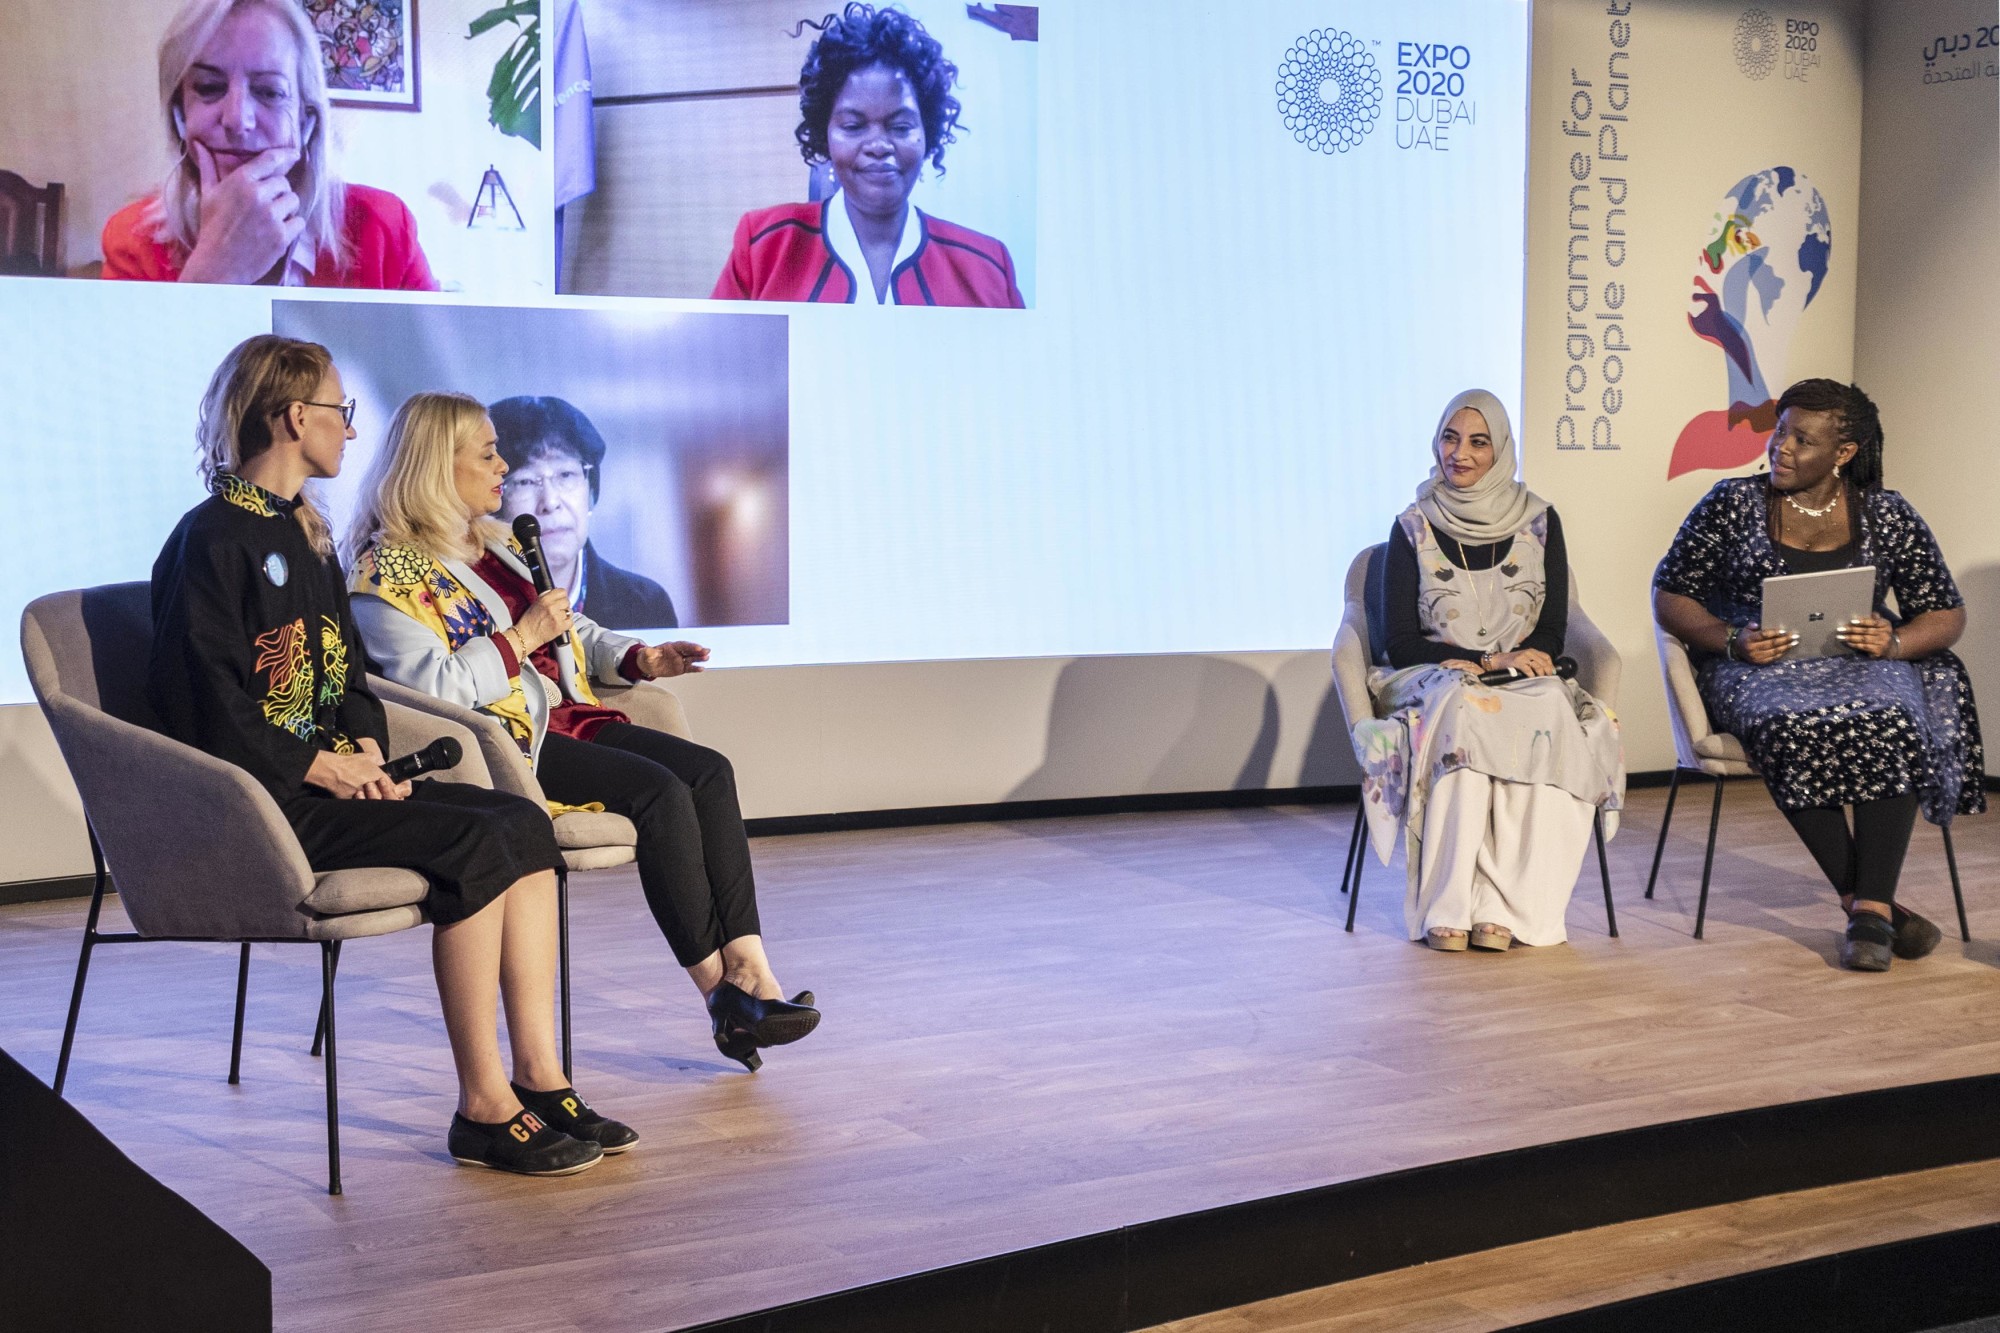 Ms Anna Andersone (L), Co-Founder and Chief Empowerment Officer, Riga TechGirls, Lourdes F Vega (L2), Professor in Chemical Engineering and Director of the Research and Innovation Center on CO2 and Hydrogen at Khalifa University, Dr Hayat